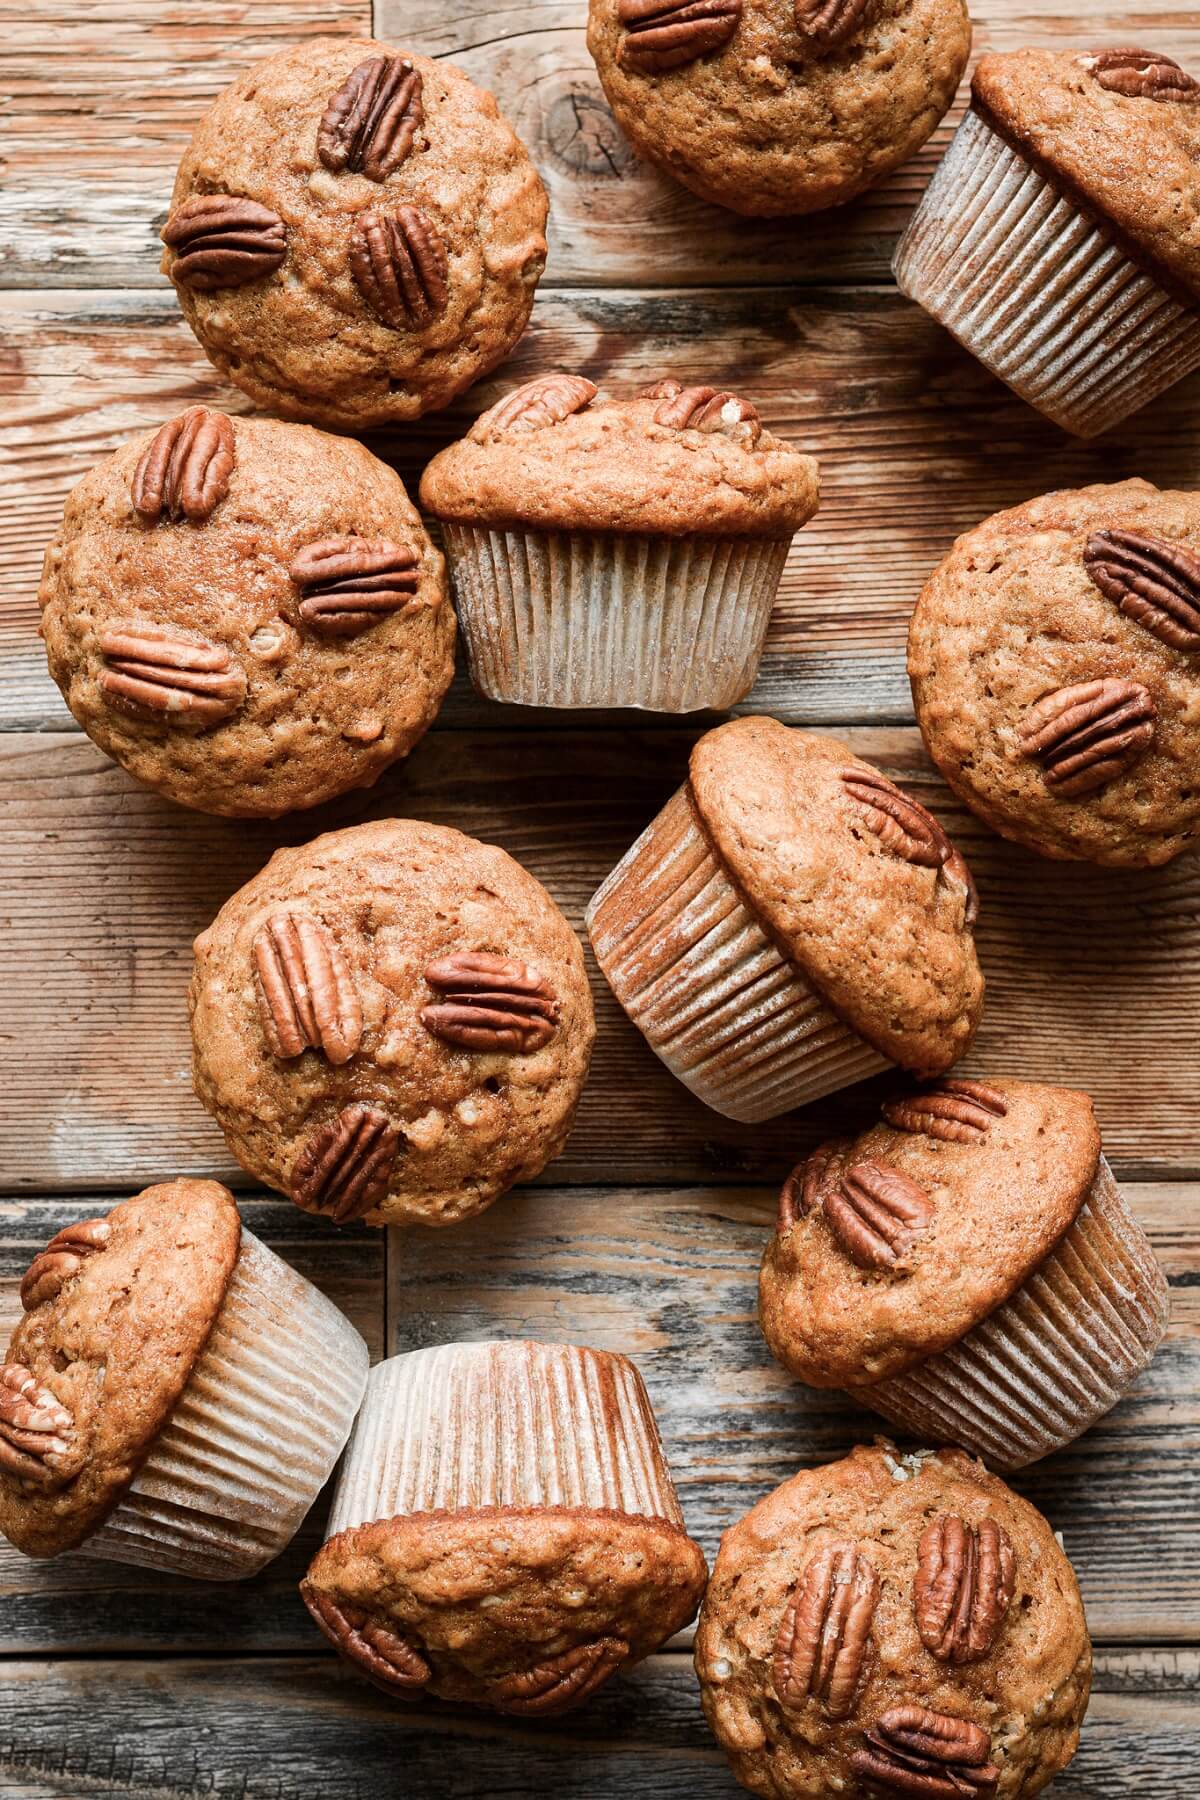 Pumpkin pecan muffins on a wooden table.